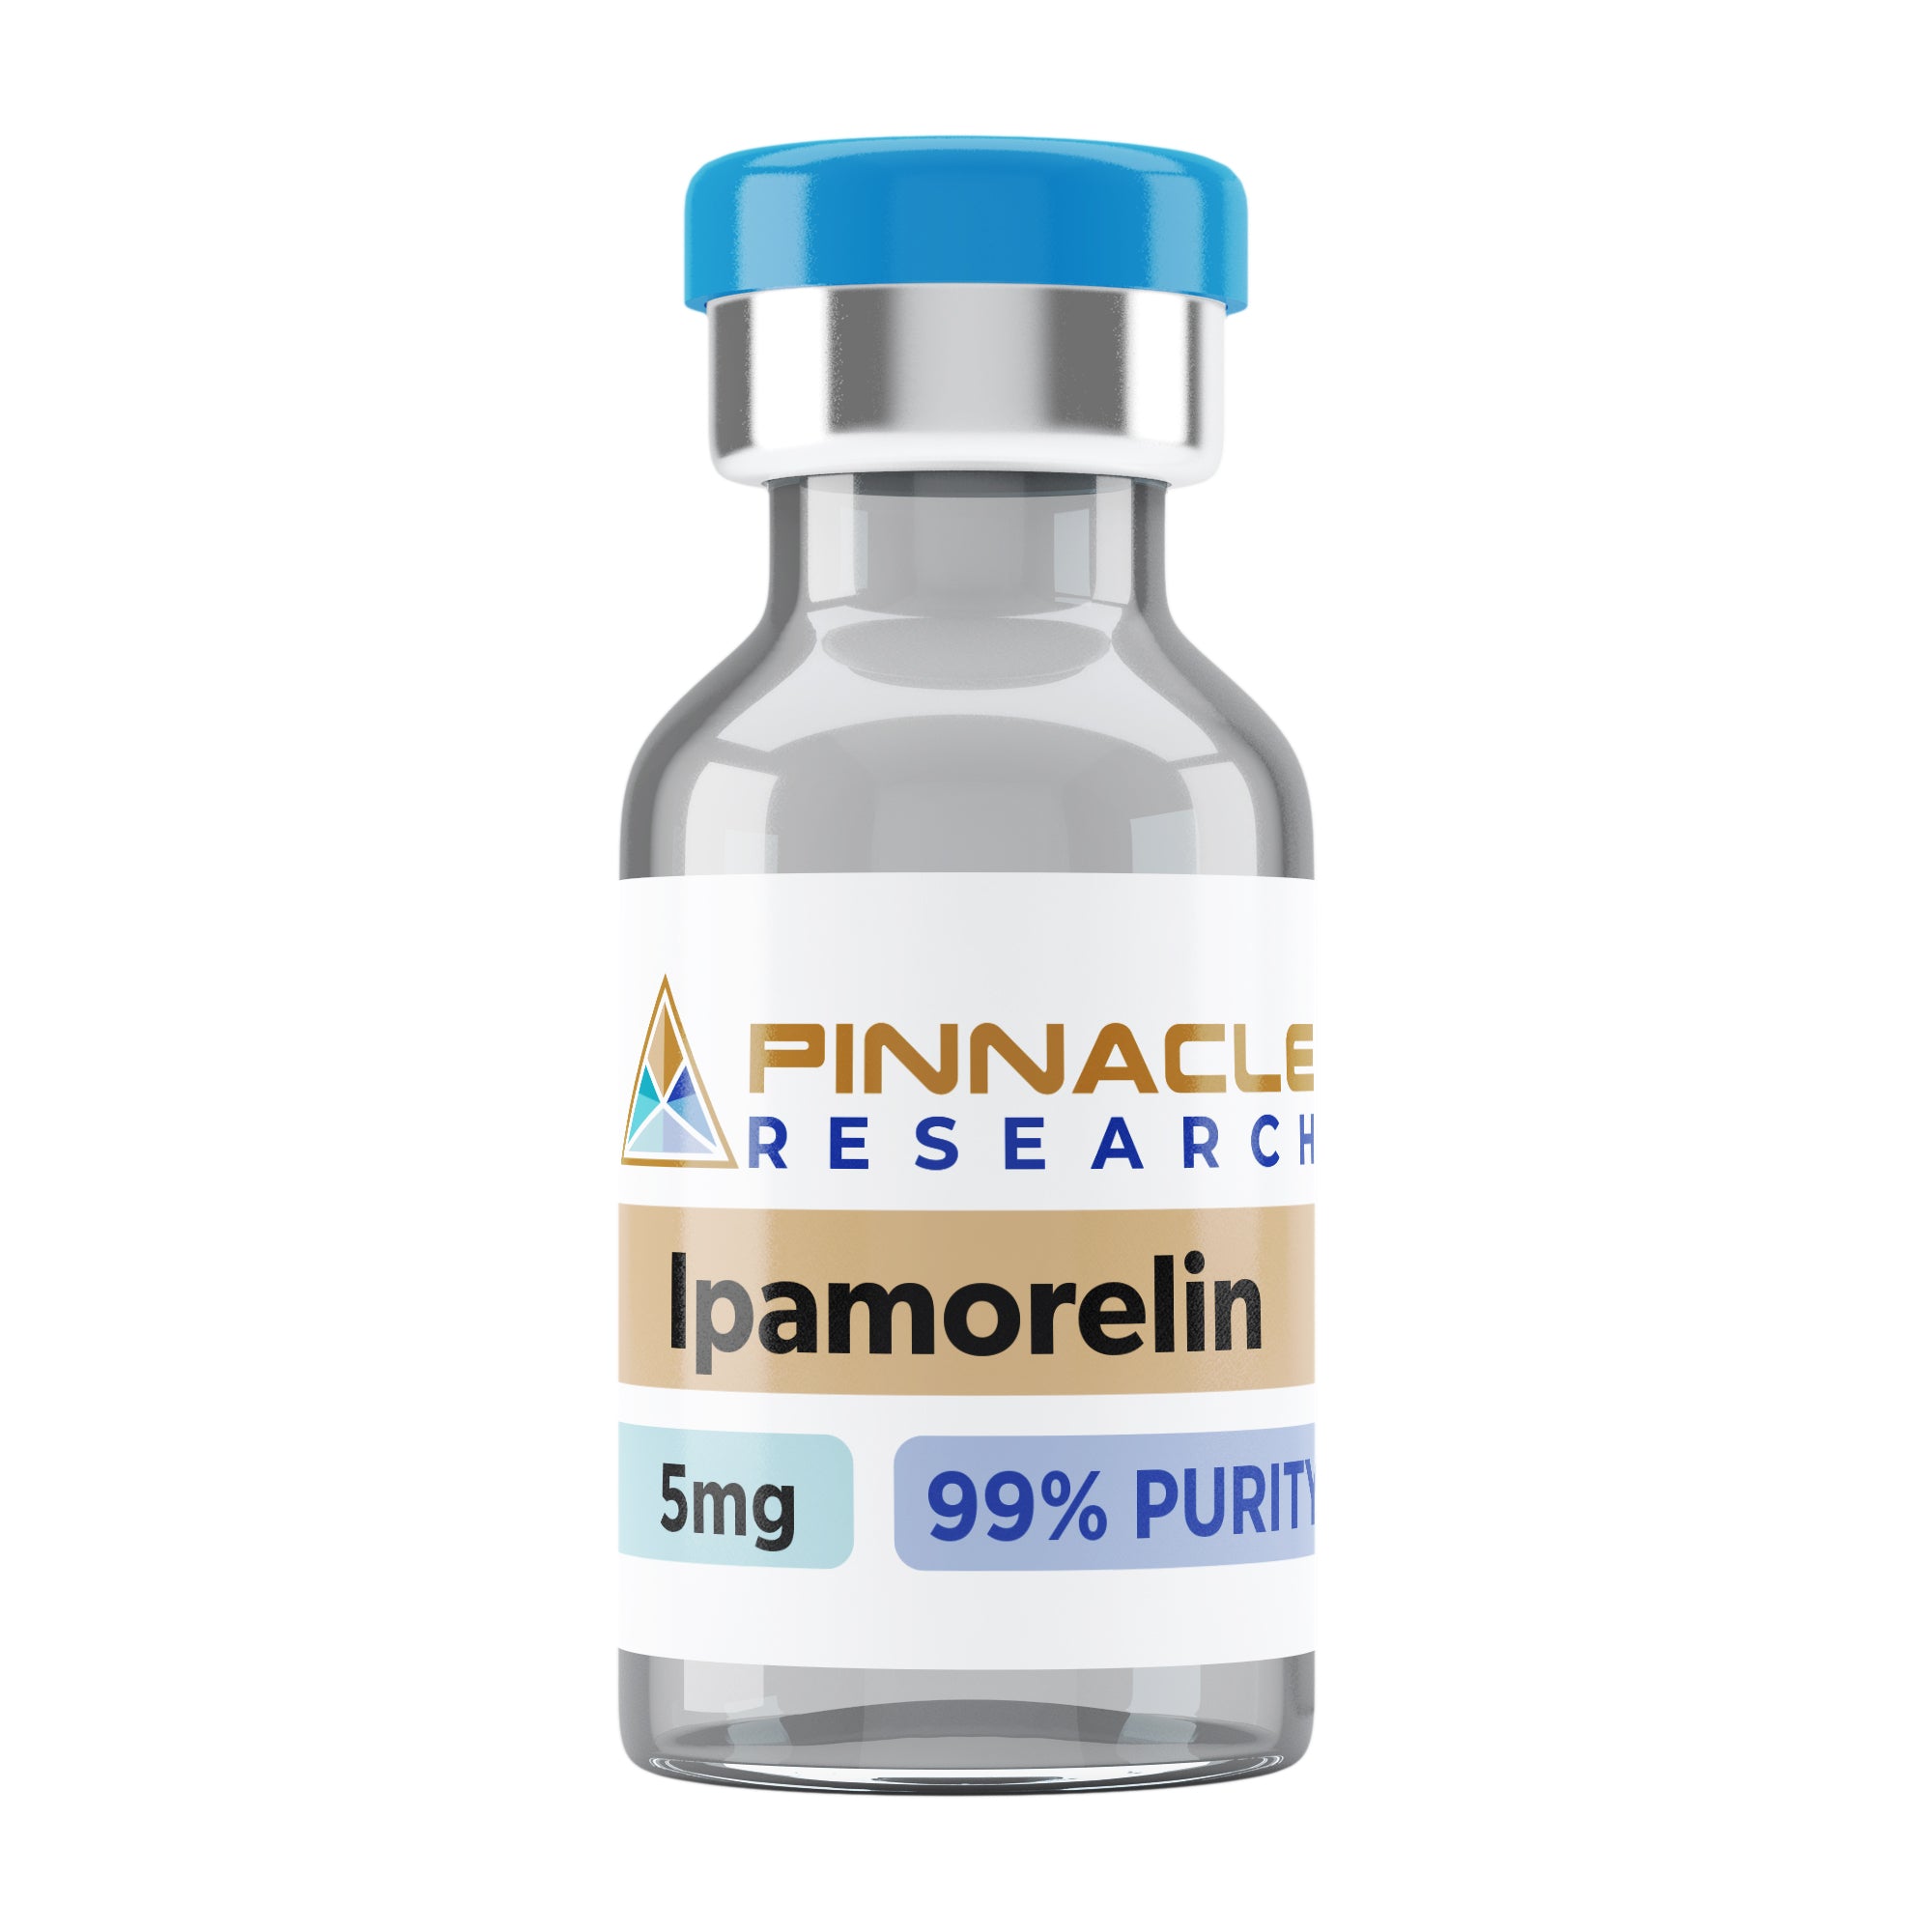 Beyond Research - Ipamorelin